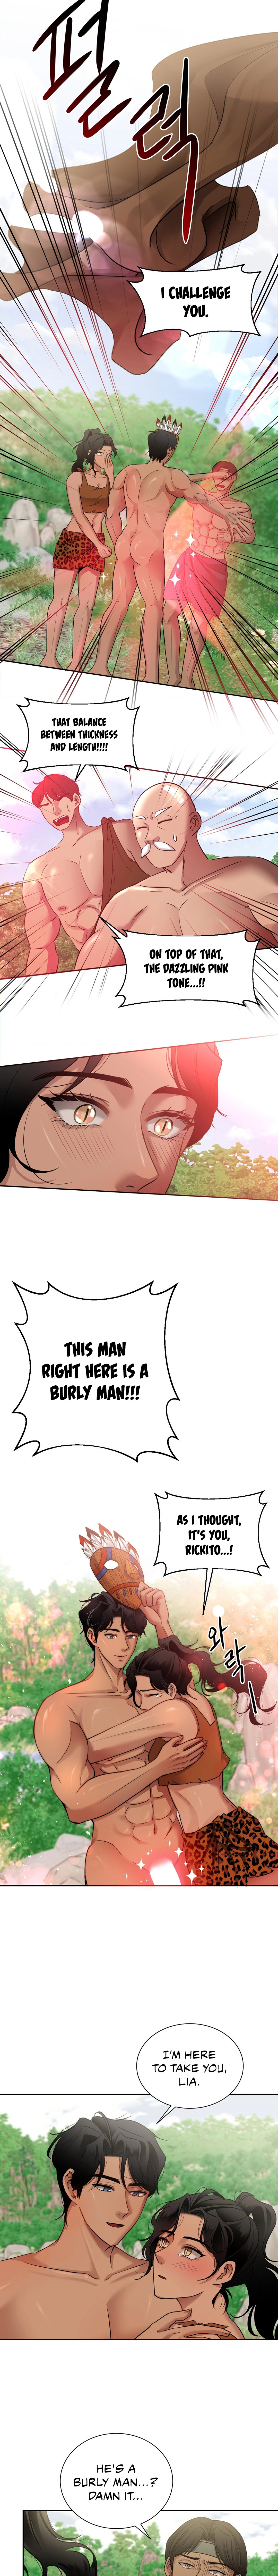 Burly man short story - Chapter 4 Page 7